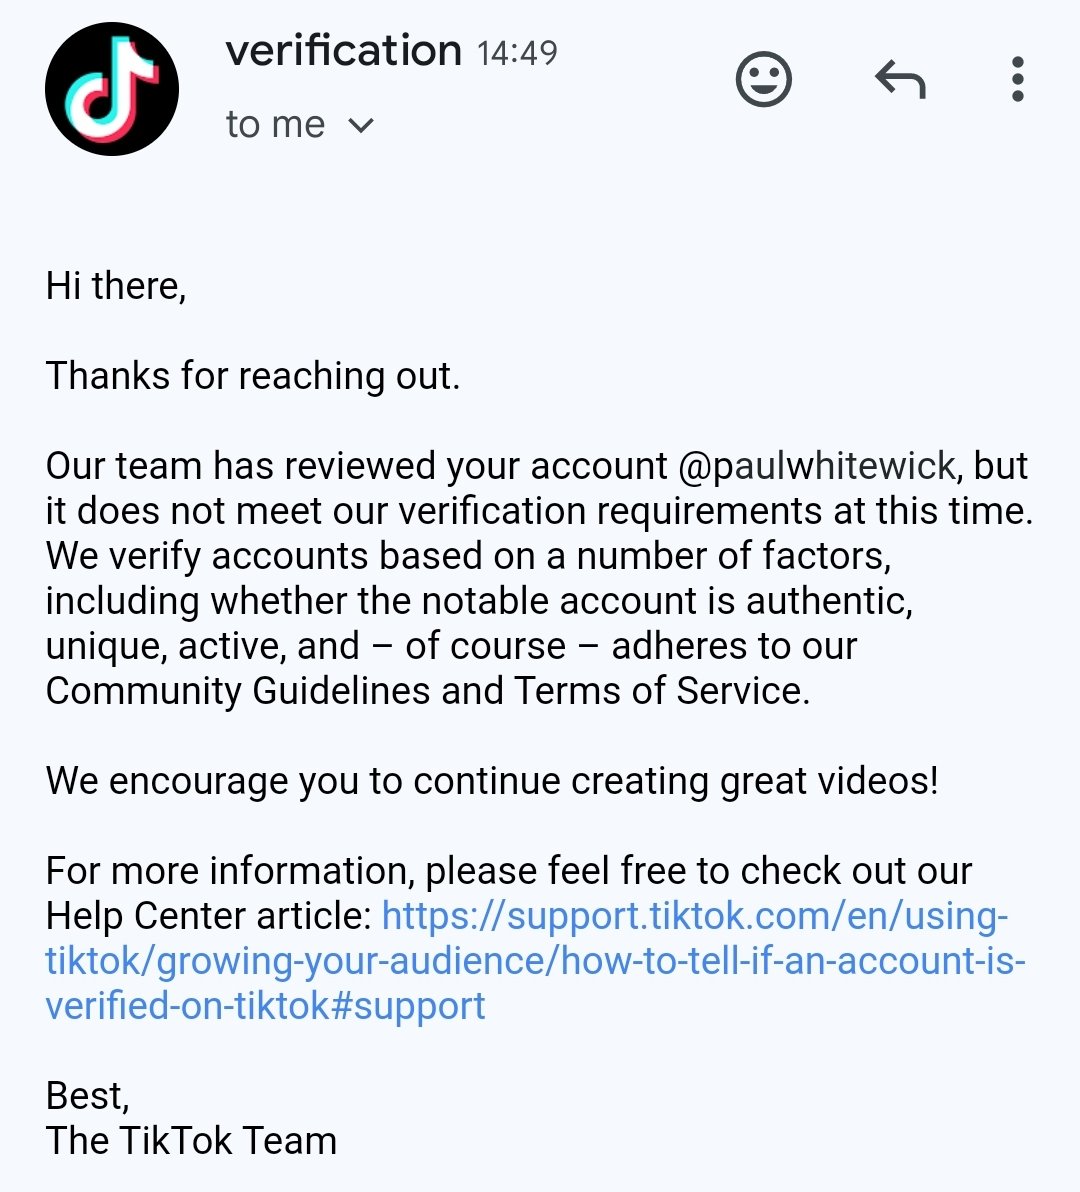 Absolute joke @TikTokSupport Your reports suggest content stealing is OK. And now I cannot be verified, yet your advice suggests this is a way to stop content theft.